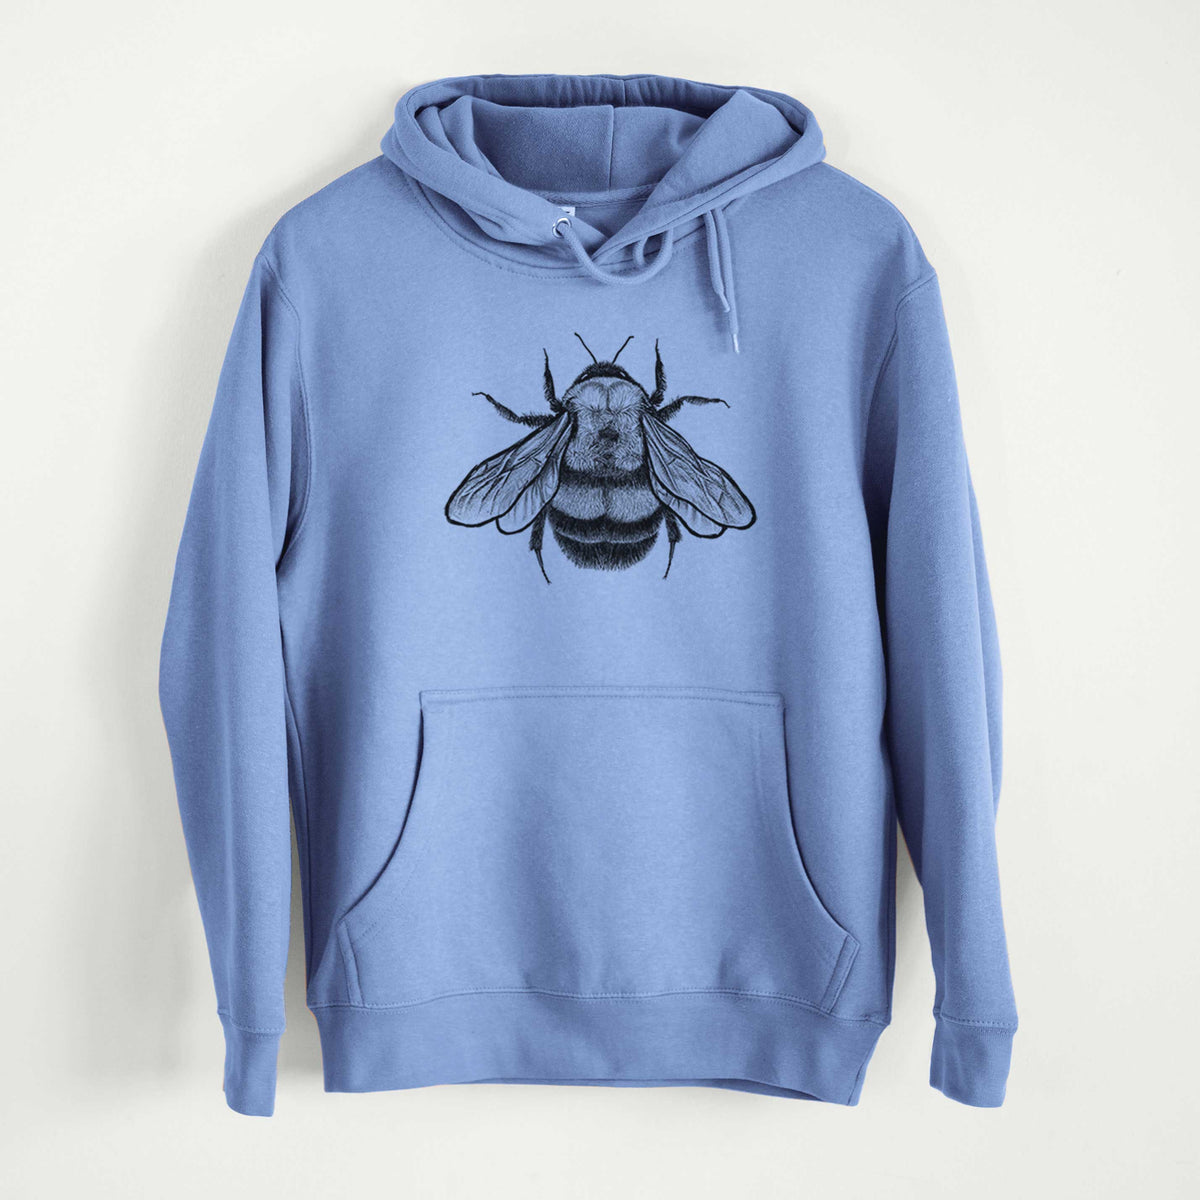 Bombus Affinis - Rusty-Patched Bumble Bee  - Mid-Weight Unisex Premium Blend Hoodie